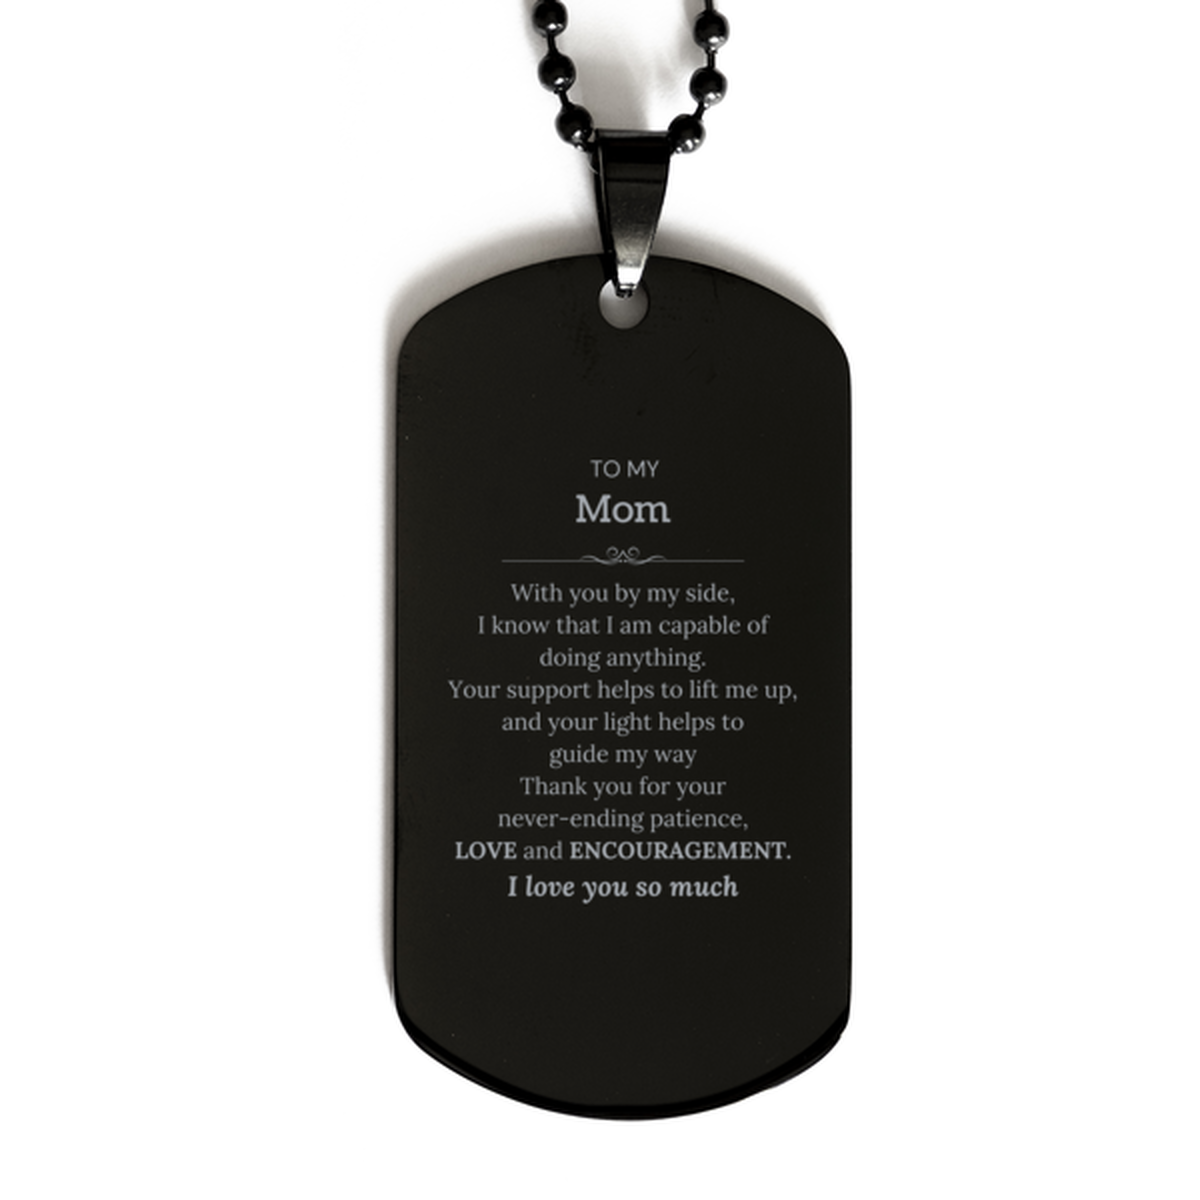 Appreciation Mom Black Dog Tag Gifts, To My Mom Birthday Christmas Wedding Keepsake Gifts for Mom With you by my side, I know that I am capable of doing anything. I love you so much